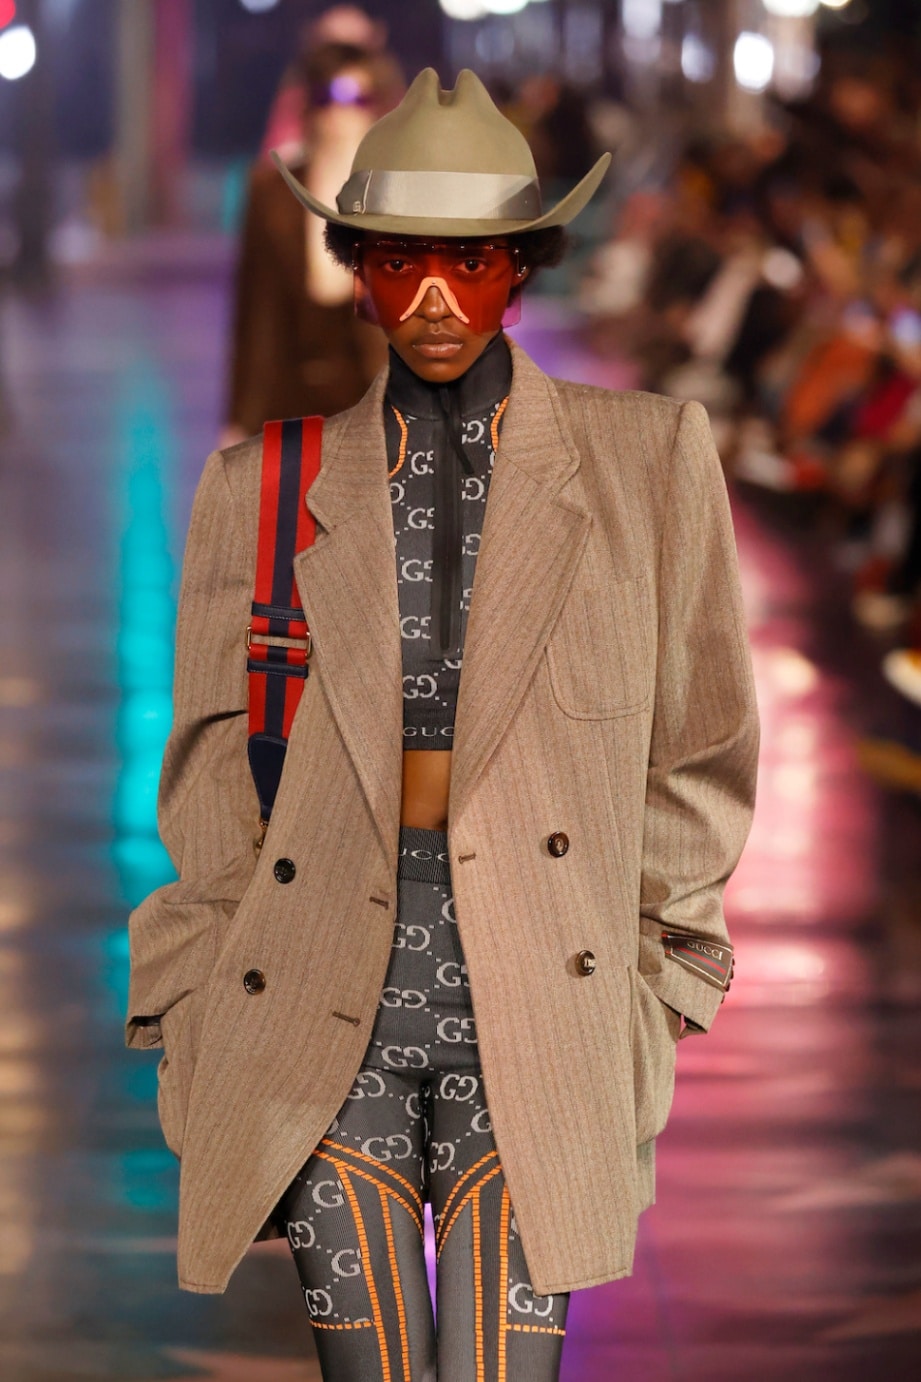 A warm tan Gucci cowboy hat with metallic silver band on top of an all-Gucci fit was modeled at the show.